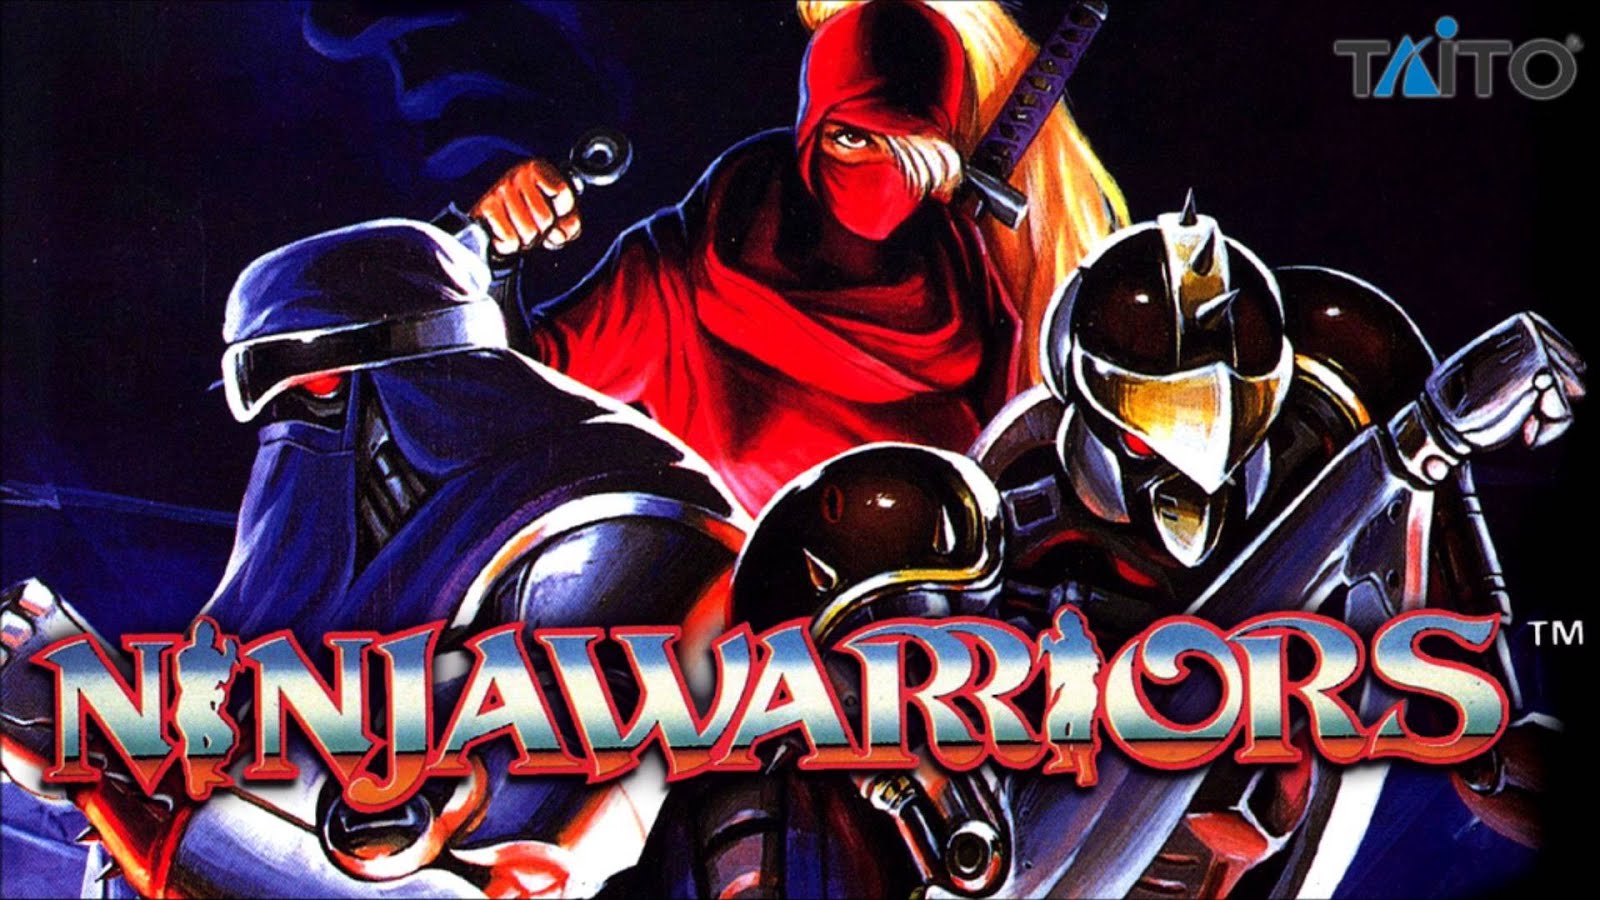 TAITO returns to console gaming with new Ninja Warriors title